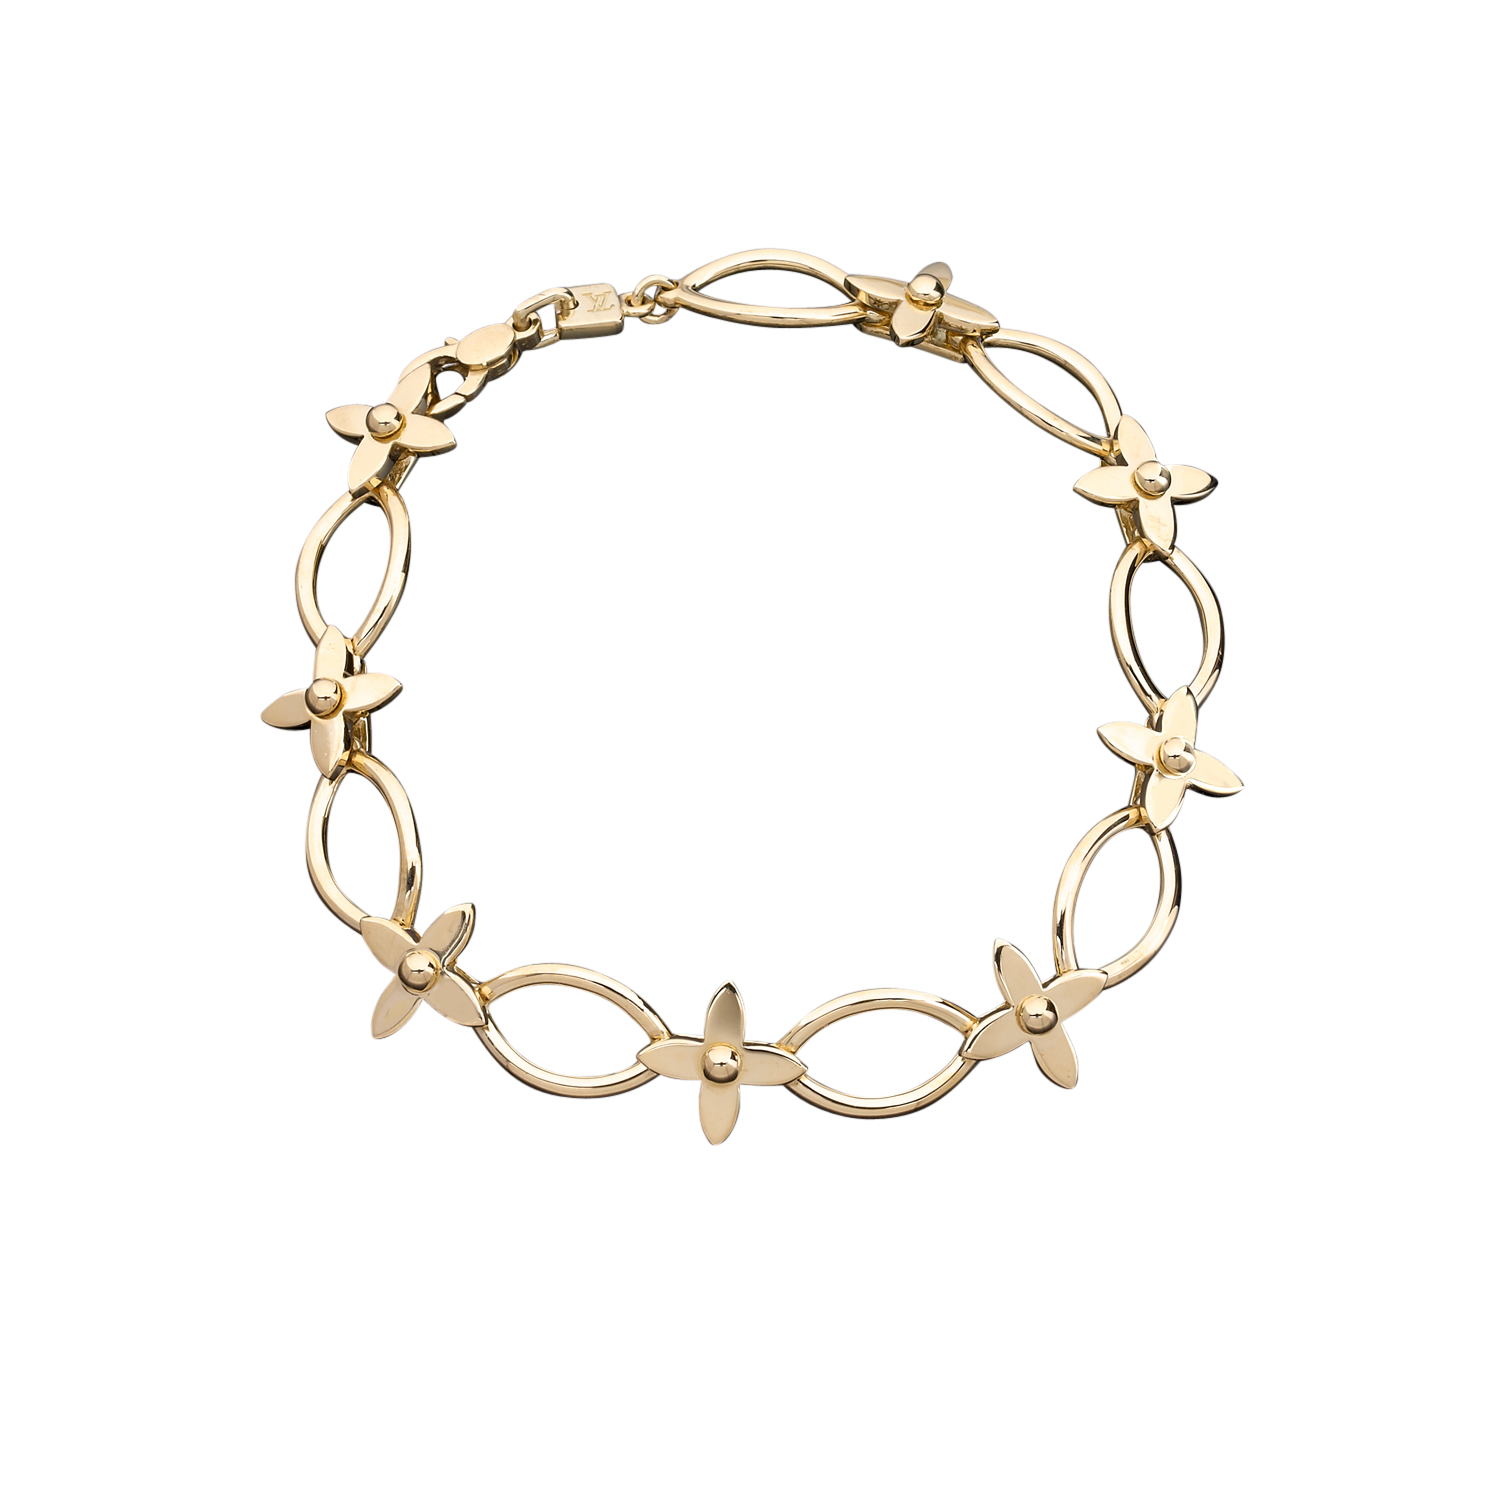 LOUIS VUITTON LOUIS VUITTON bracelet sweet charms Monogram Gold Plated Used  LV Product Code2101216160699BRAND OFF Online Store